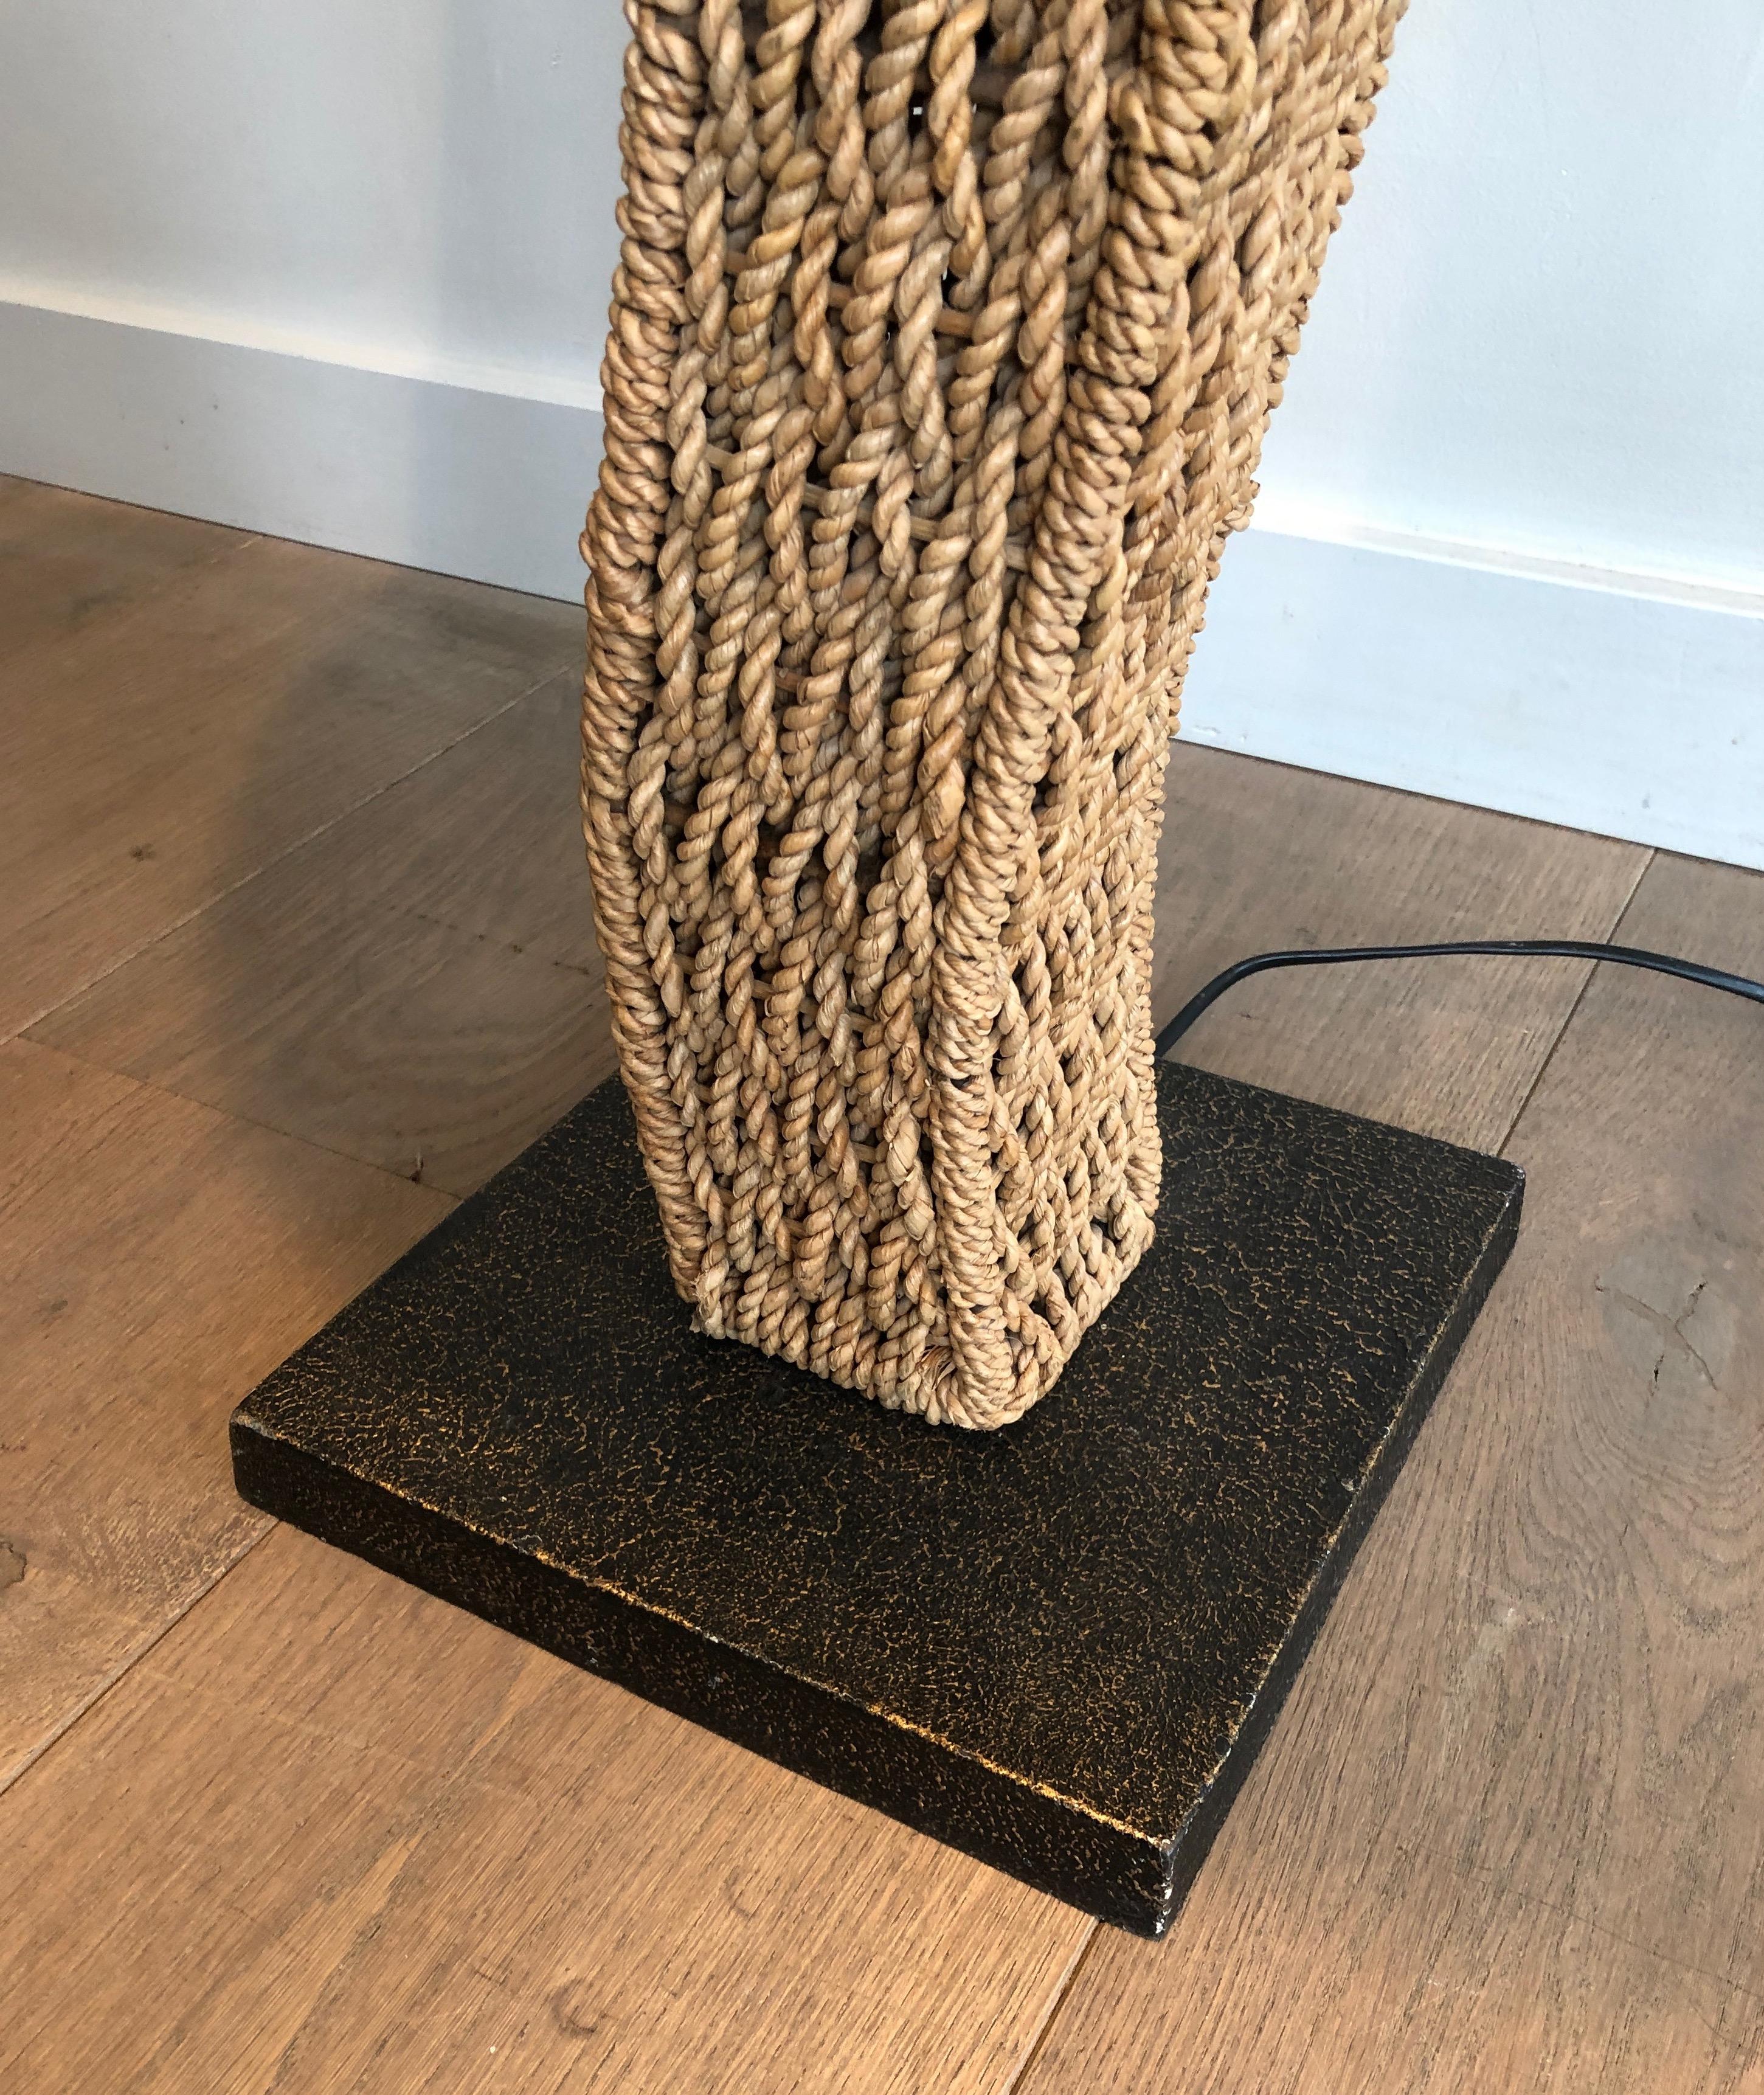 Braided Rope Floor Lamp on a Square Metal Base. Japonses Work, circa 1980 For Sale 13